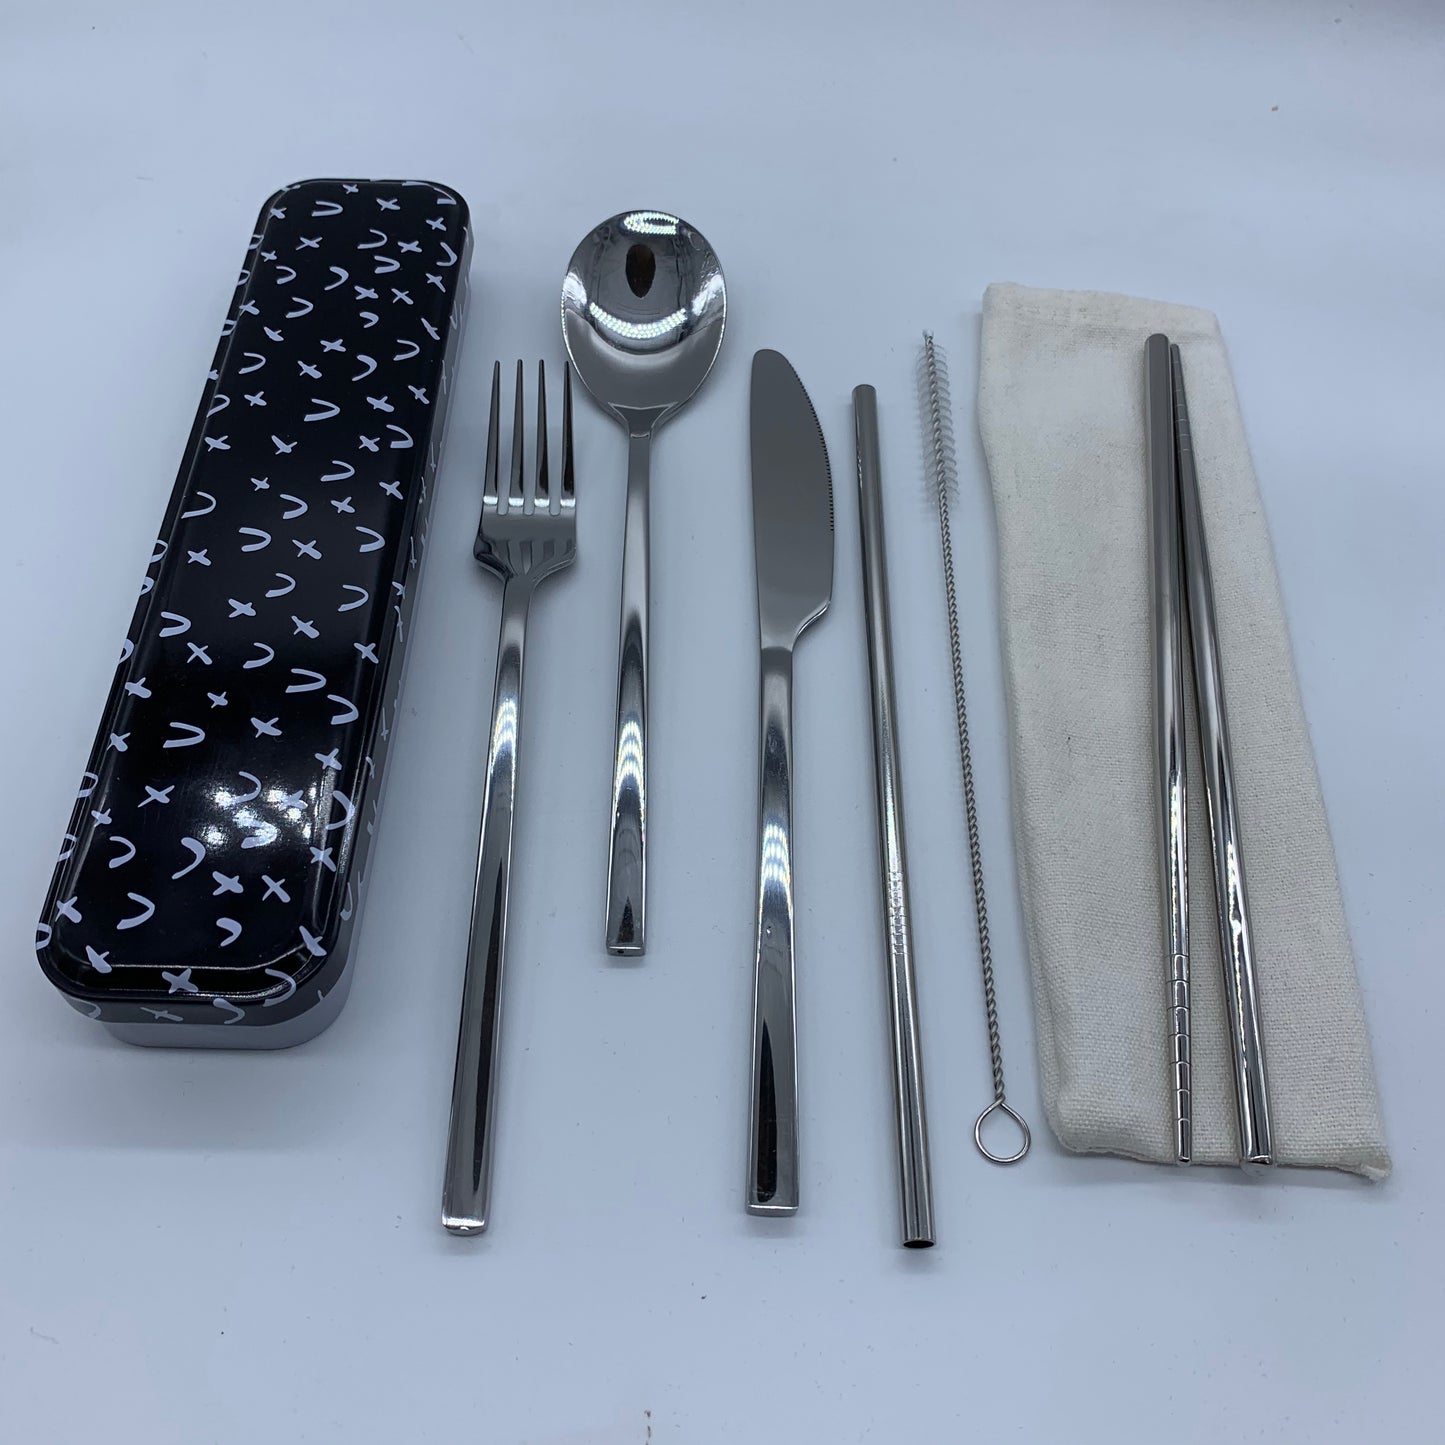 RetroKitchen Carry Your Cutlery